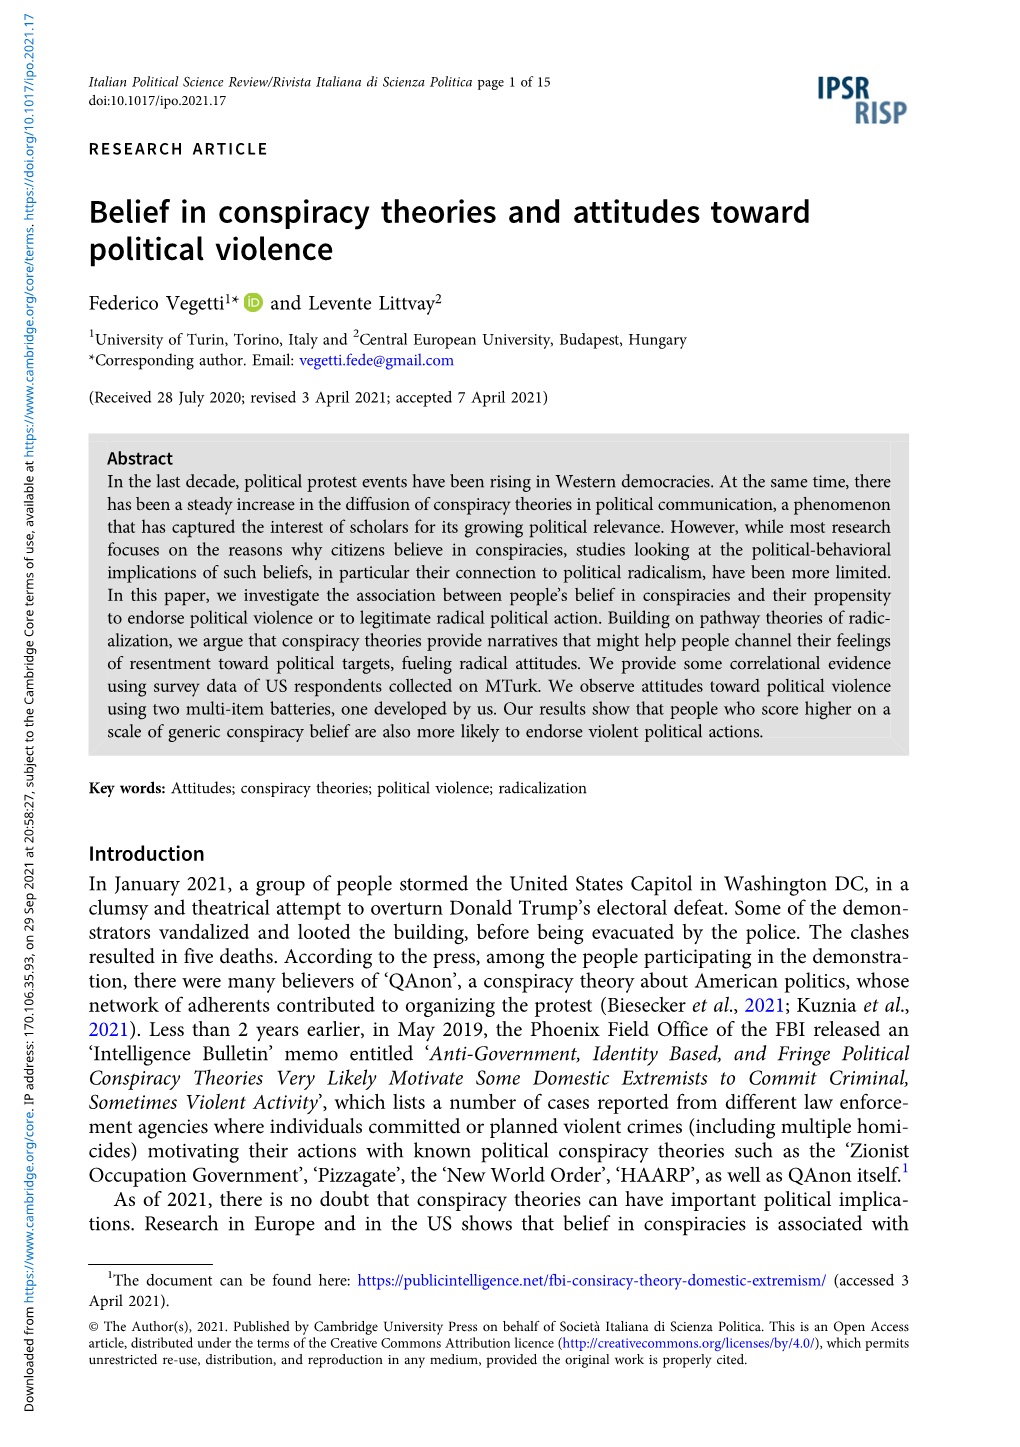 Belief in Conspiracy Theories and Attitudes Toward Political Violence